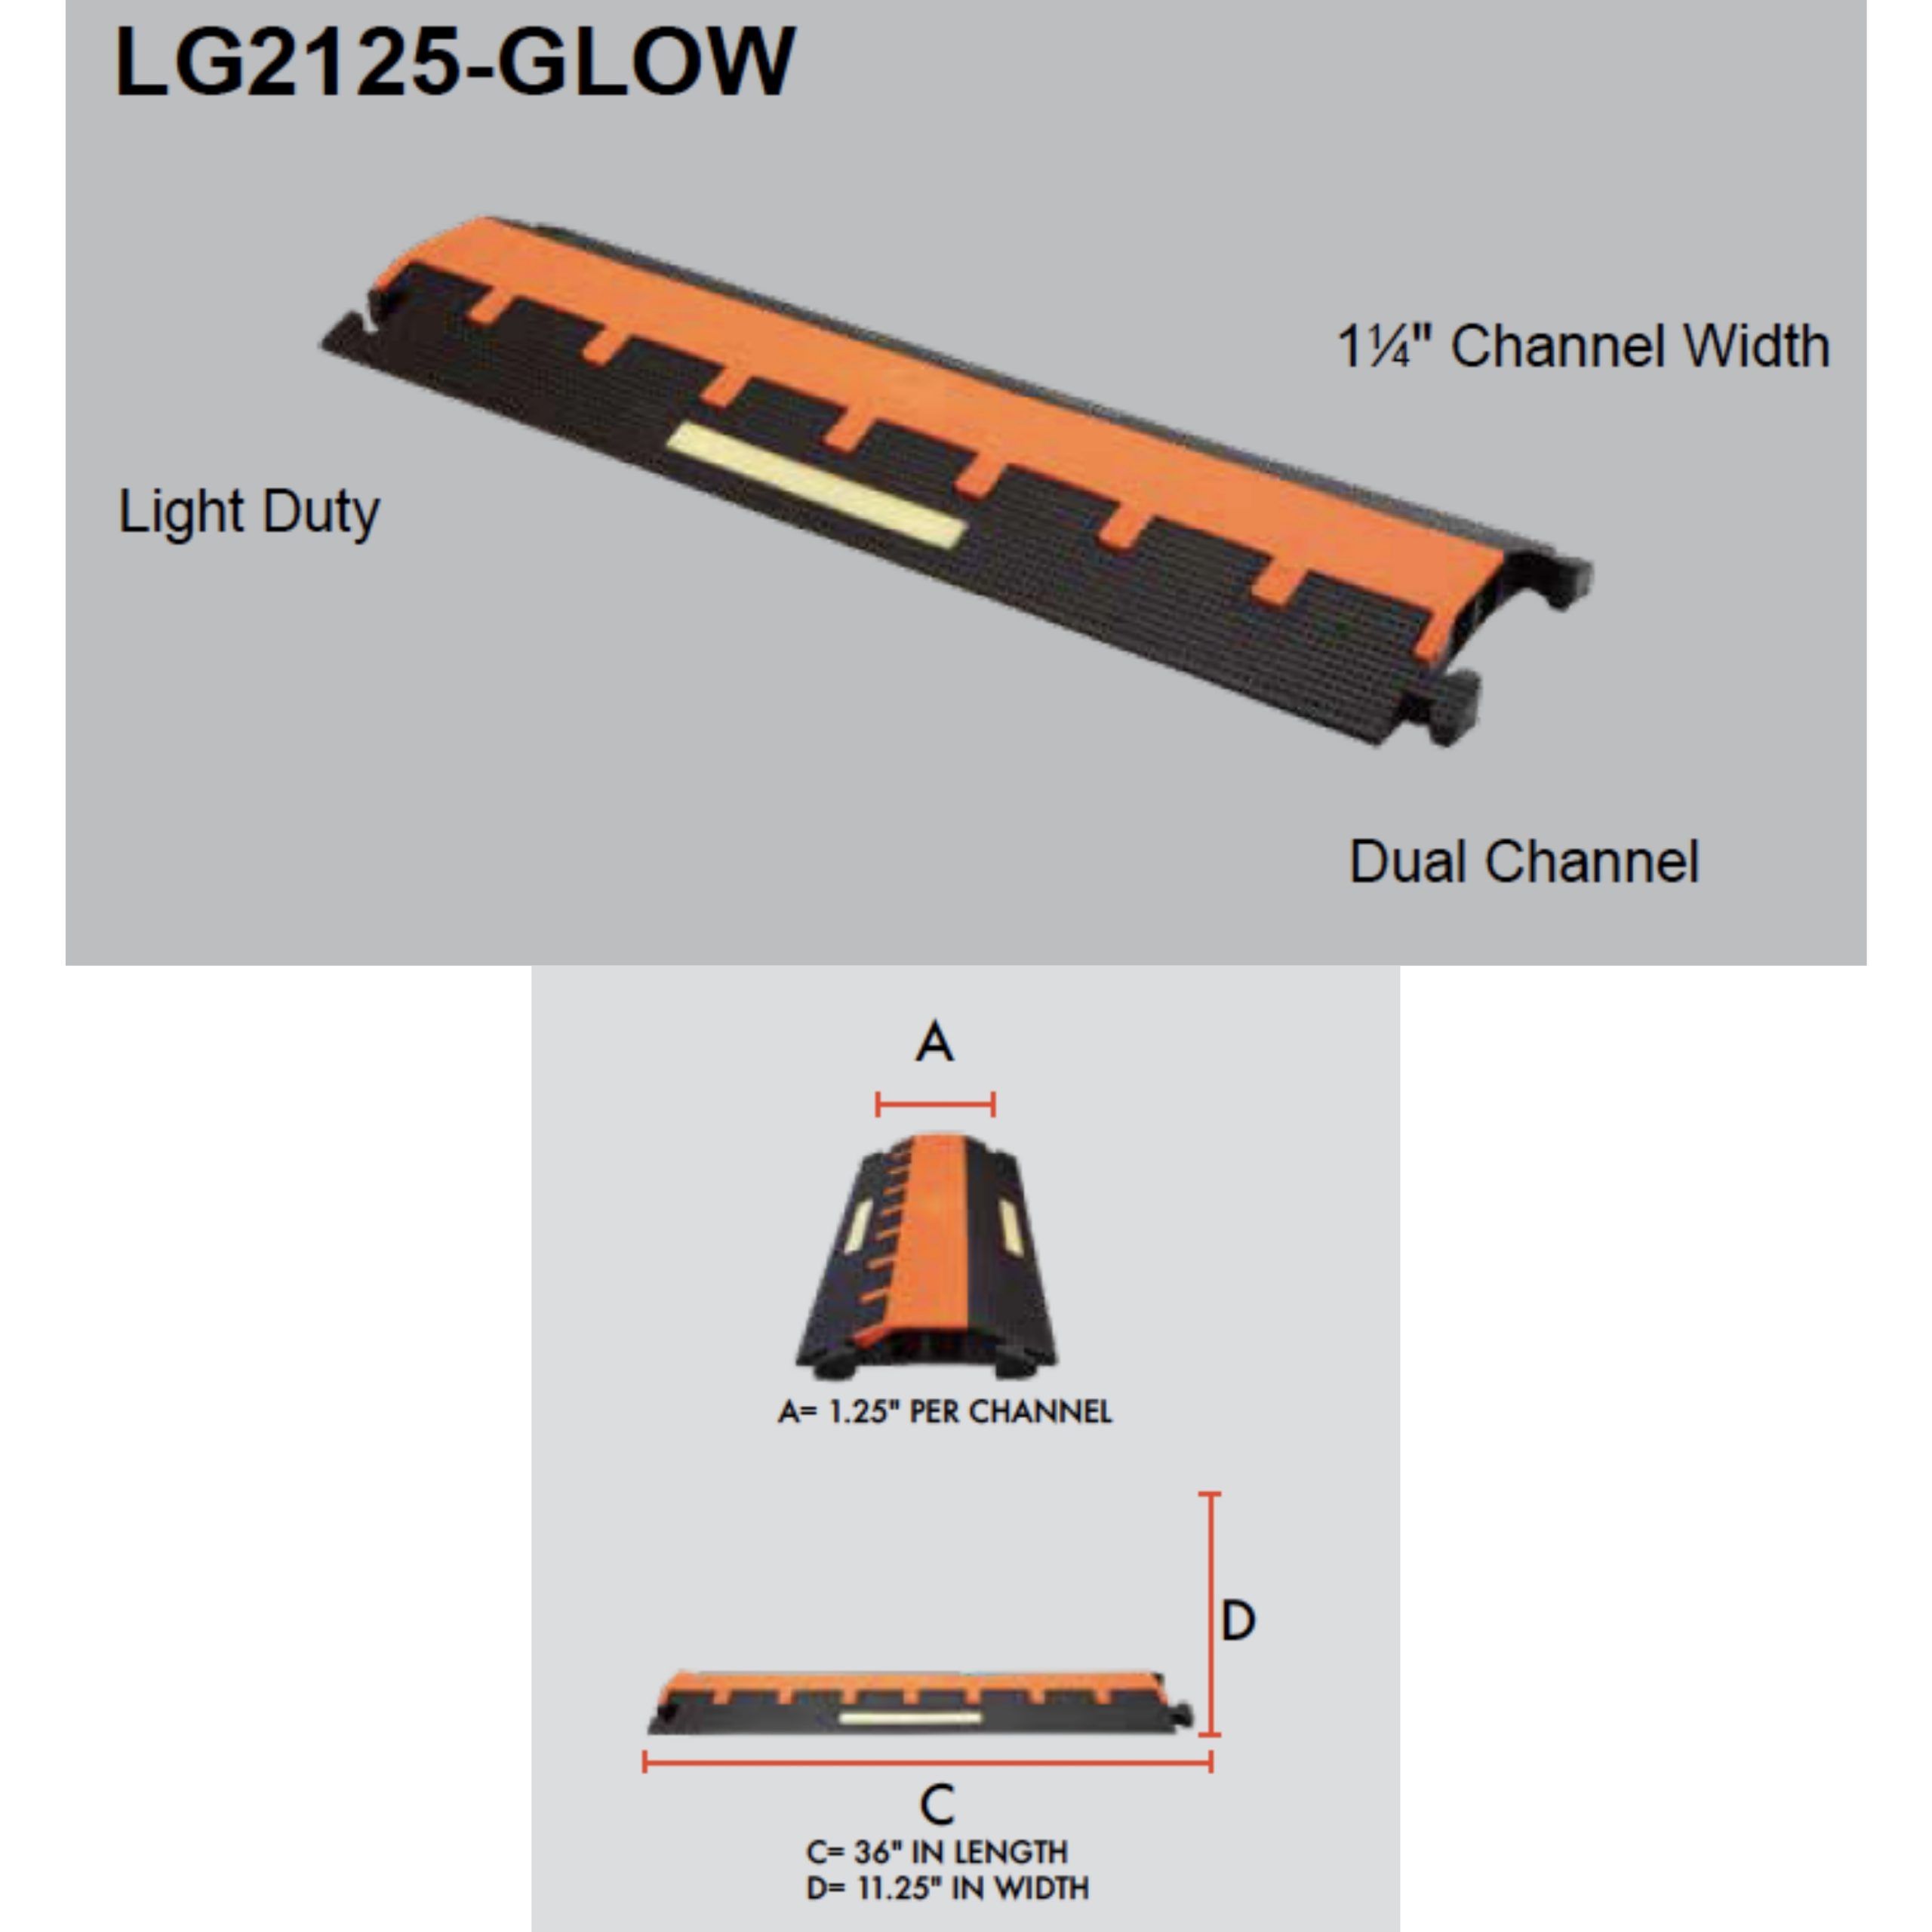 https://www.cableprotectorworks.com/wp-content/uploads/2021/04/Elasco-Products-Lite-Guard-Cable-Protector-LG2125-GLOW-4-scaled.jpg